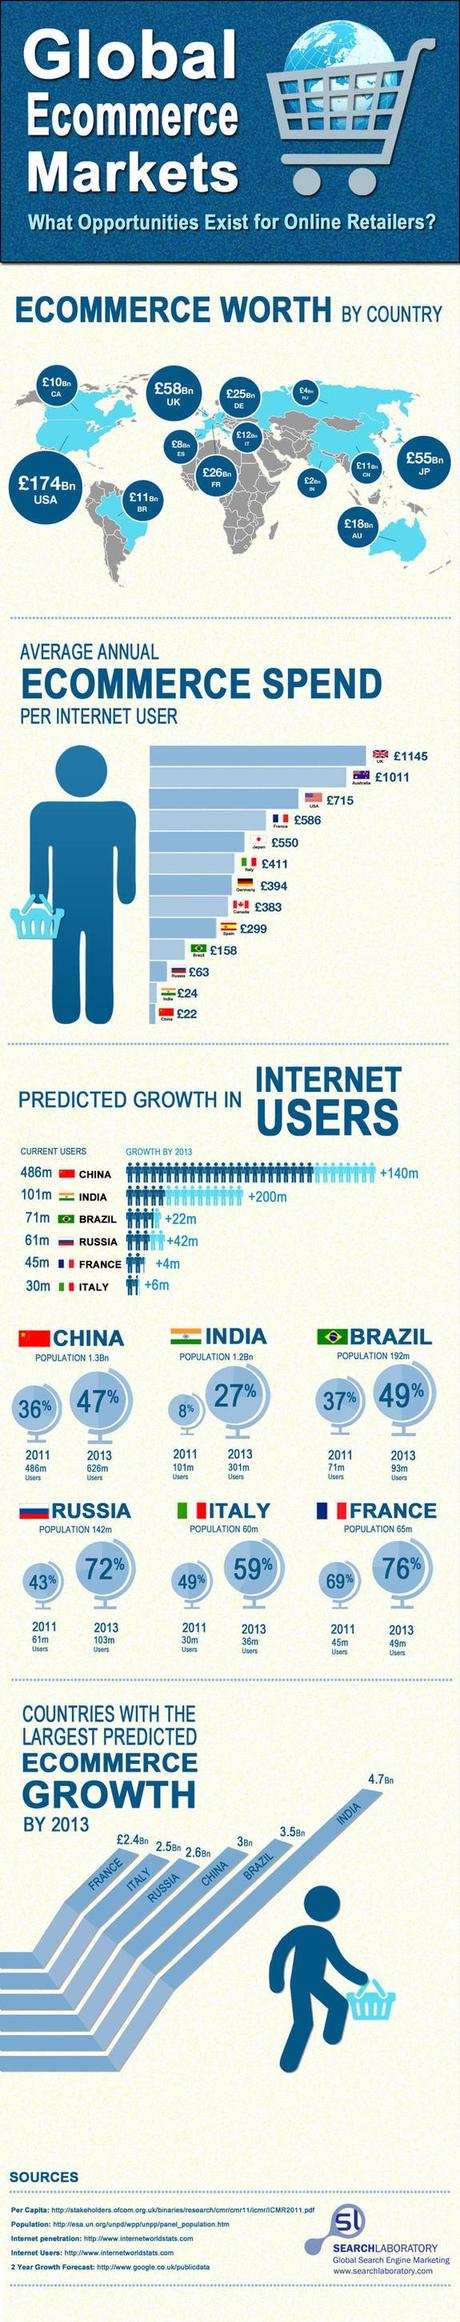 Global Ecommerce Markets Infographic